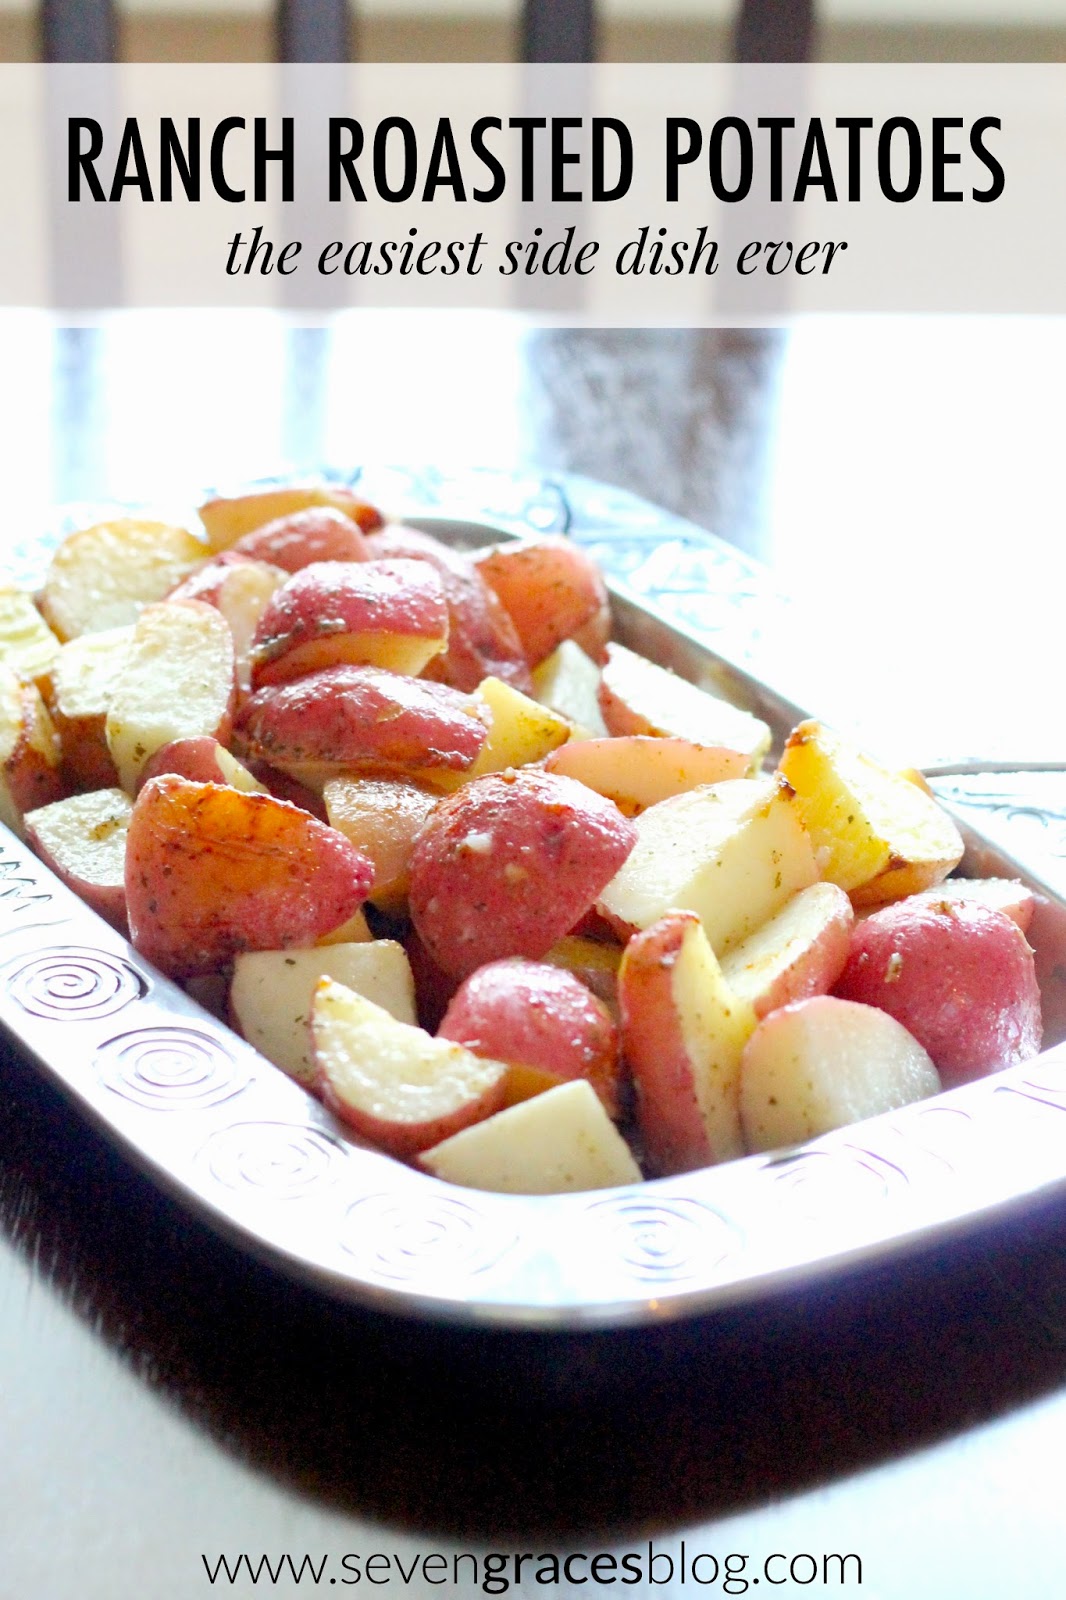 RANCH ROASTED POTATOES. Easiest side dish ever!